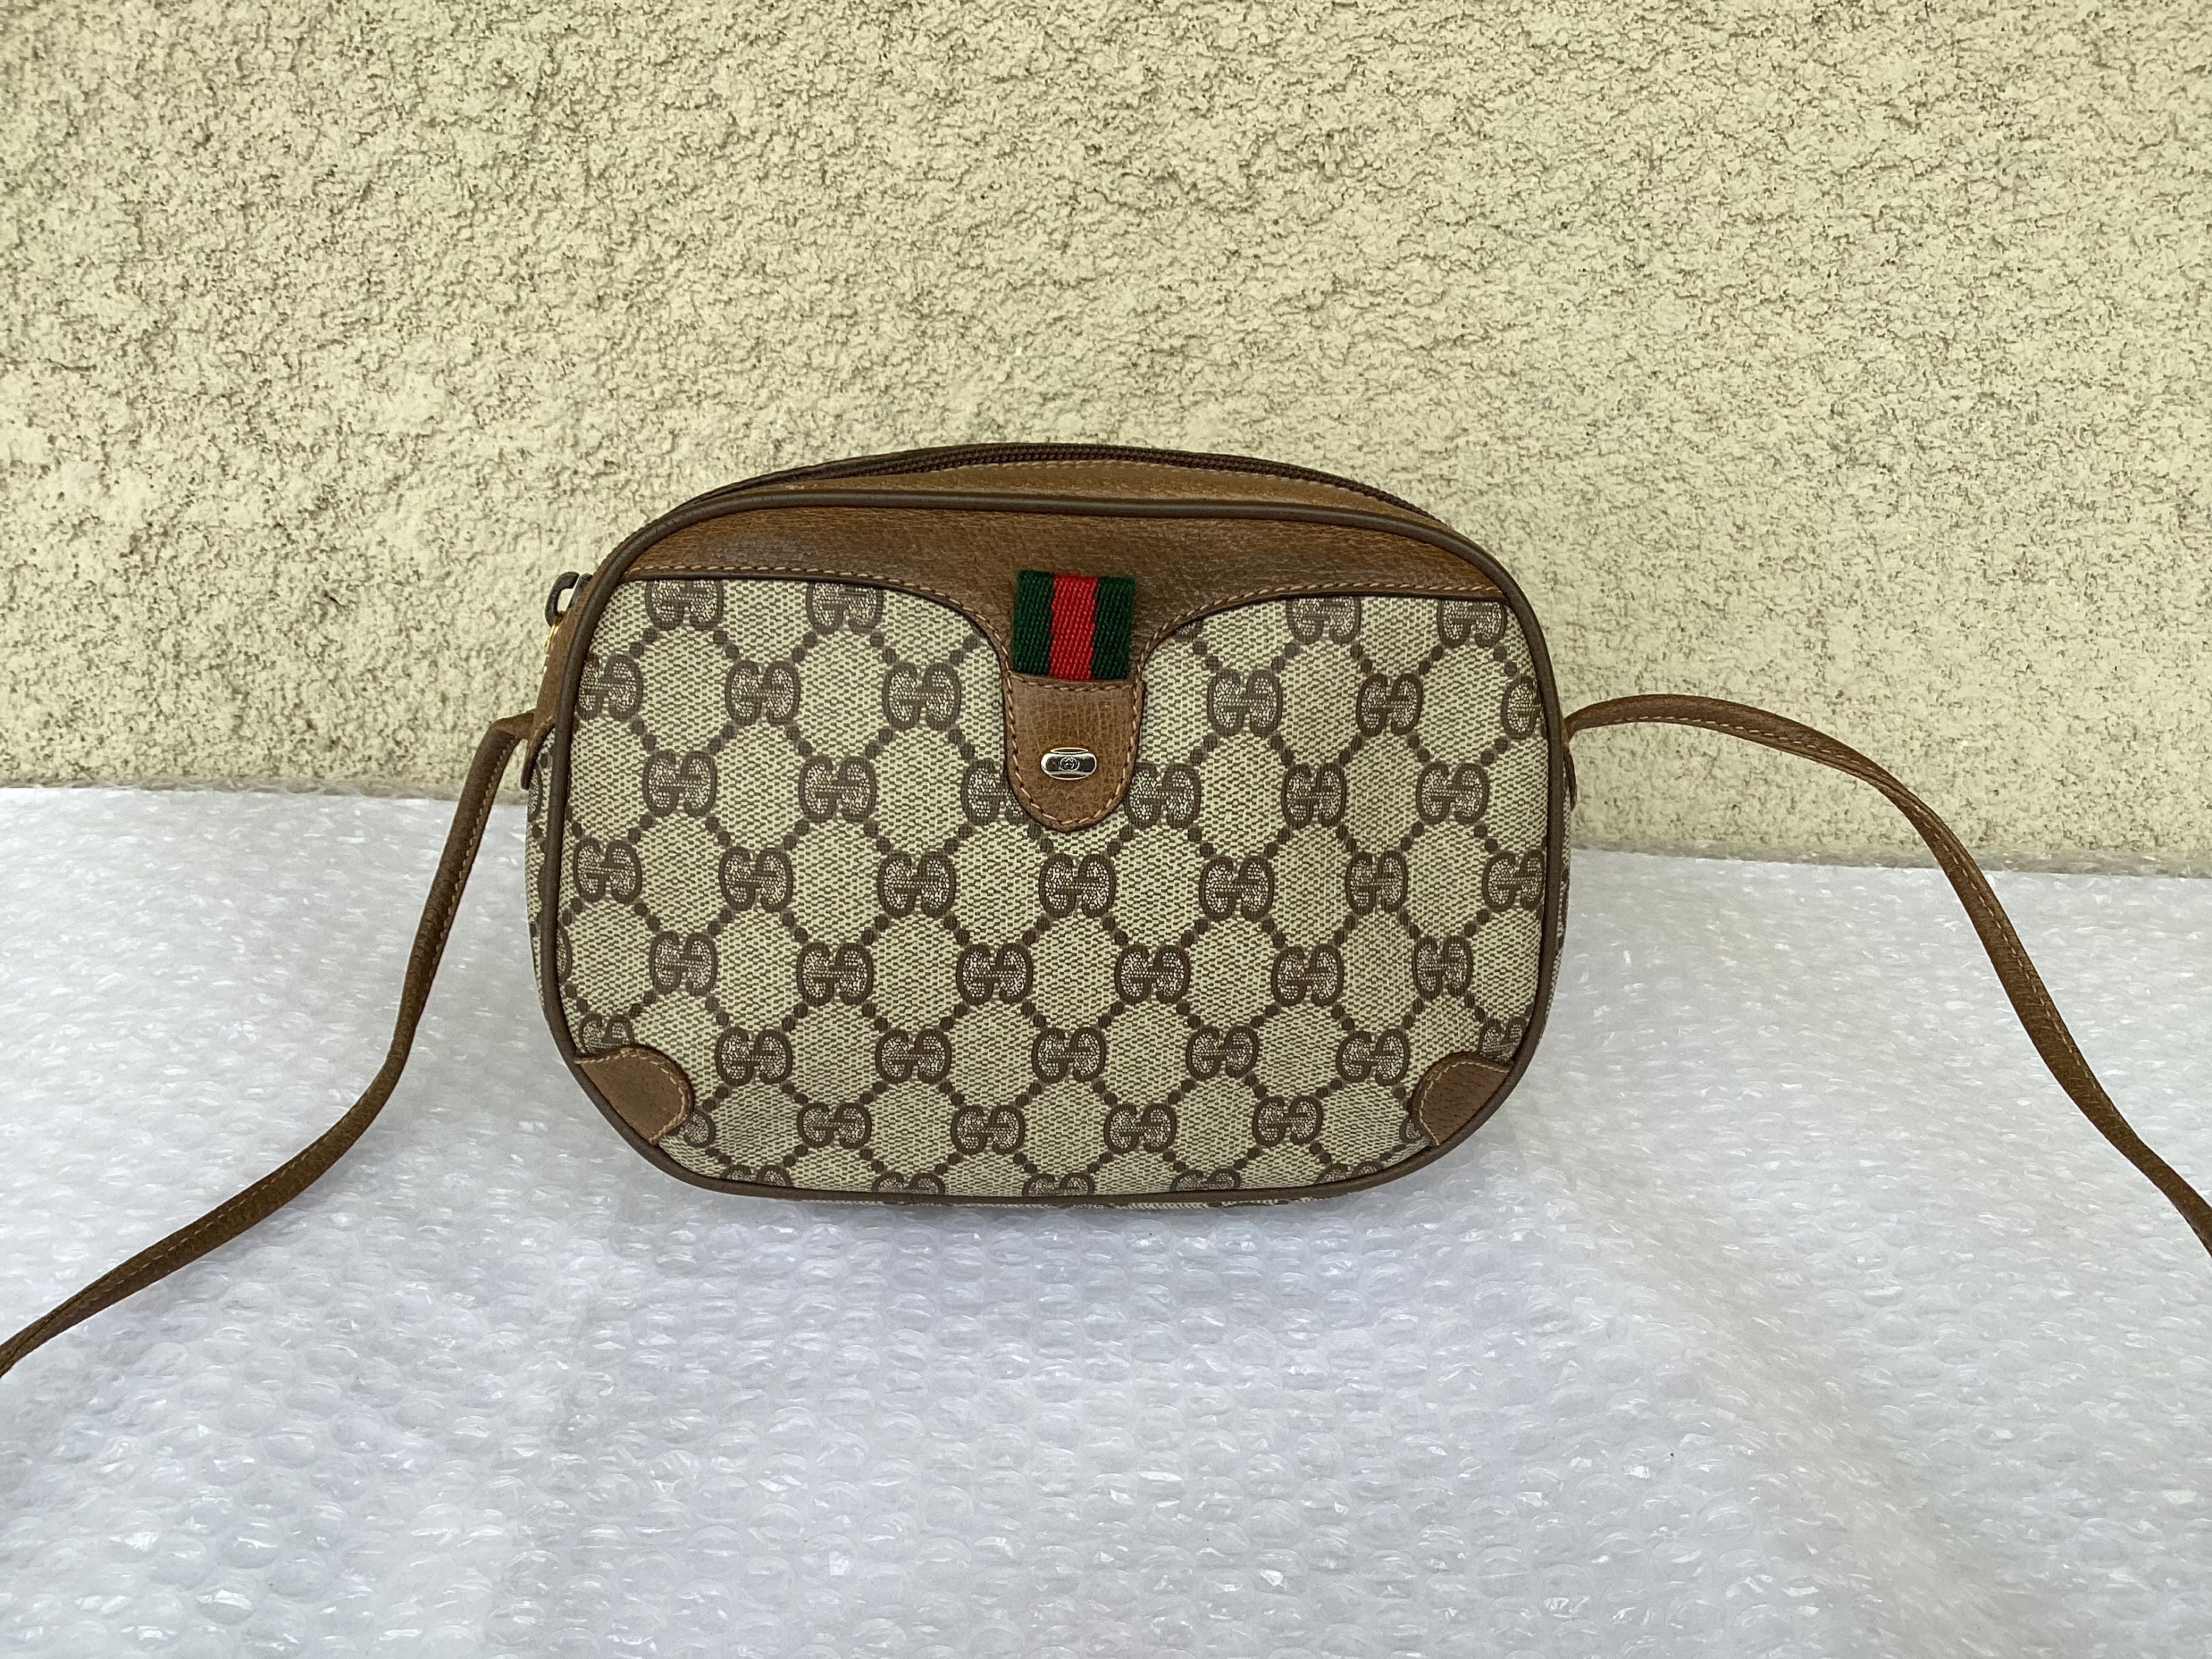 GUCCI GG Retro mini leather-trimmed printed coated-canvas shoulder